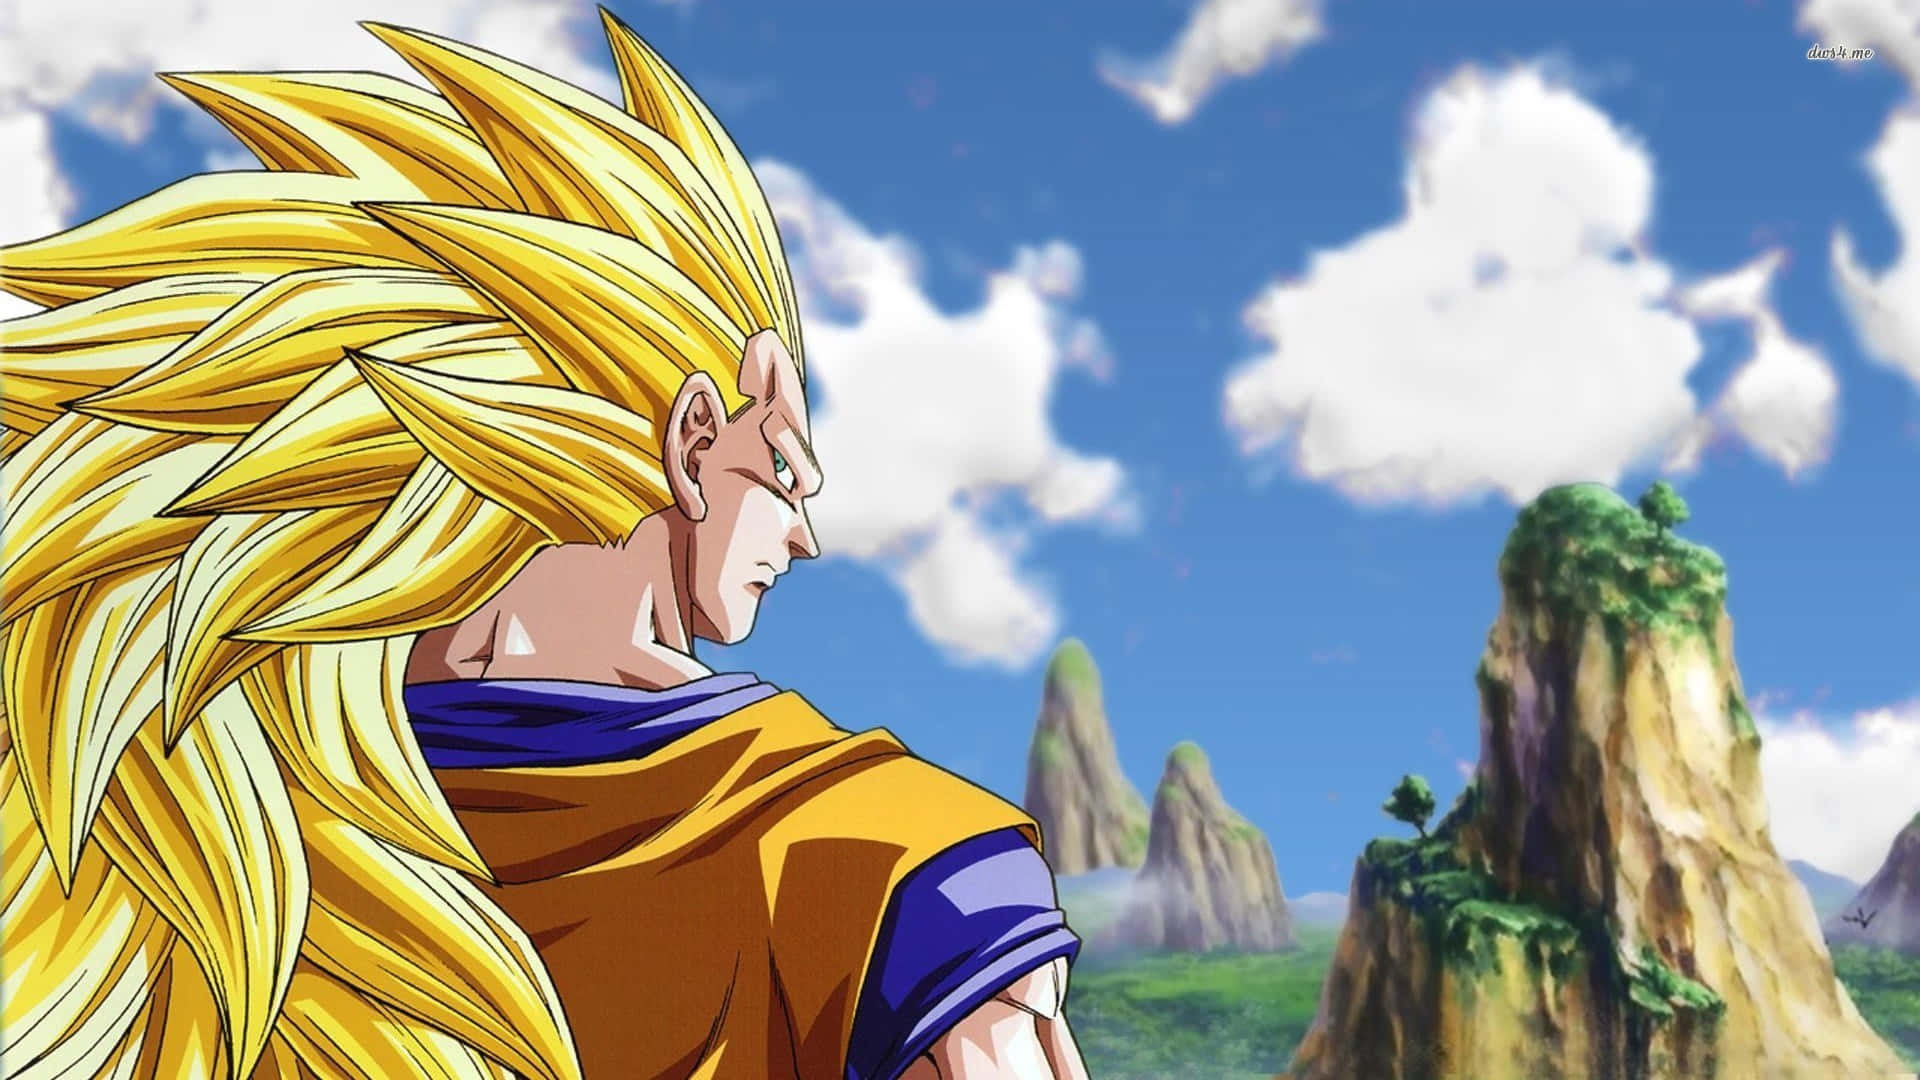 Unleash your inner power with the SSJ3 transformation Wallpaper